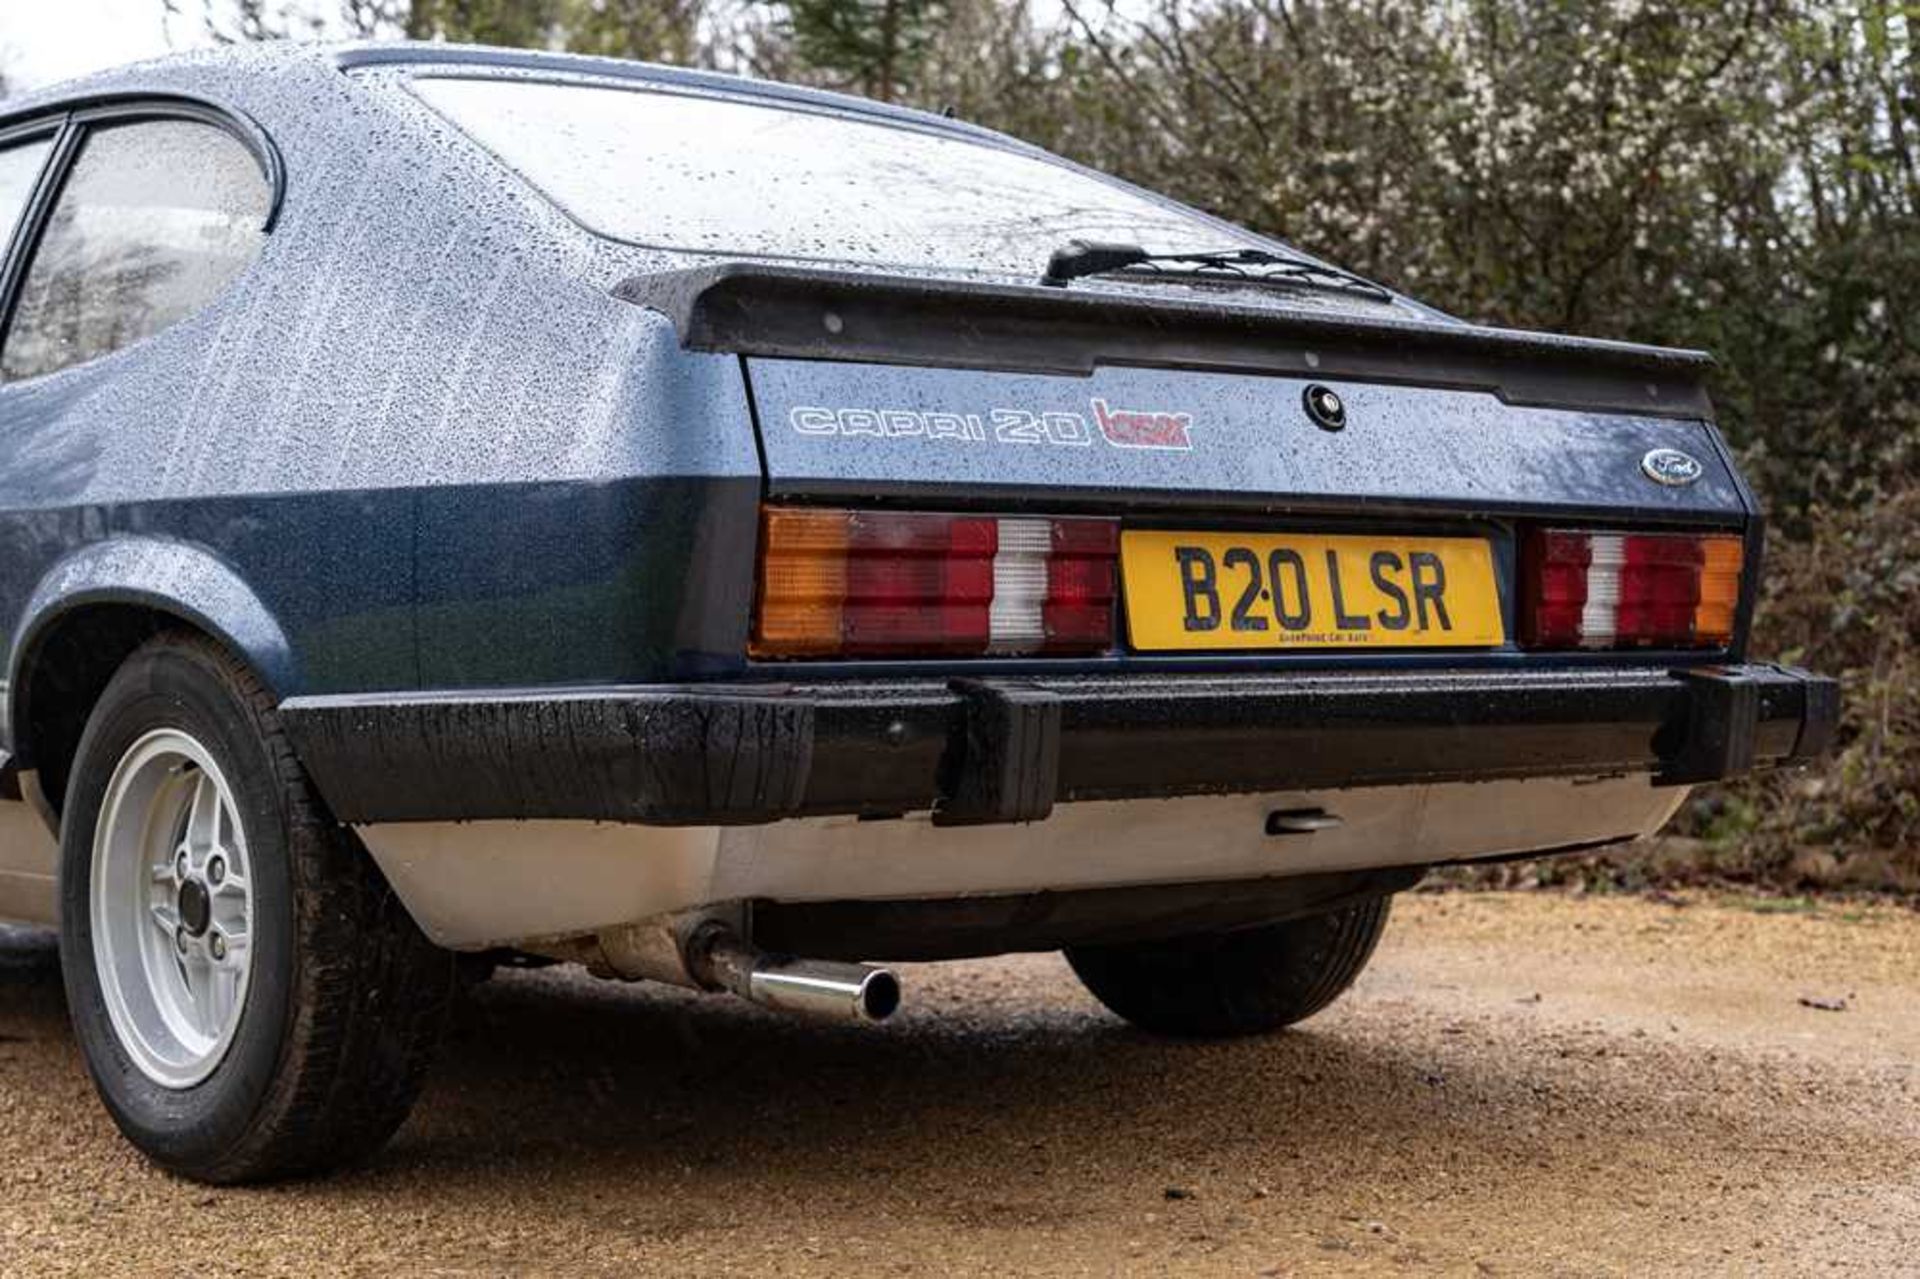 1985 Ford Capri Laser 2.0 Litre Warranted 55,300 miles from new - Image 30 of 67